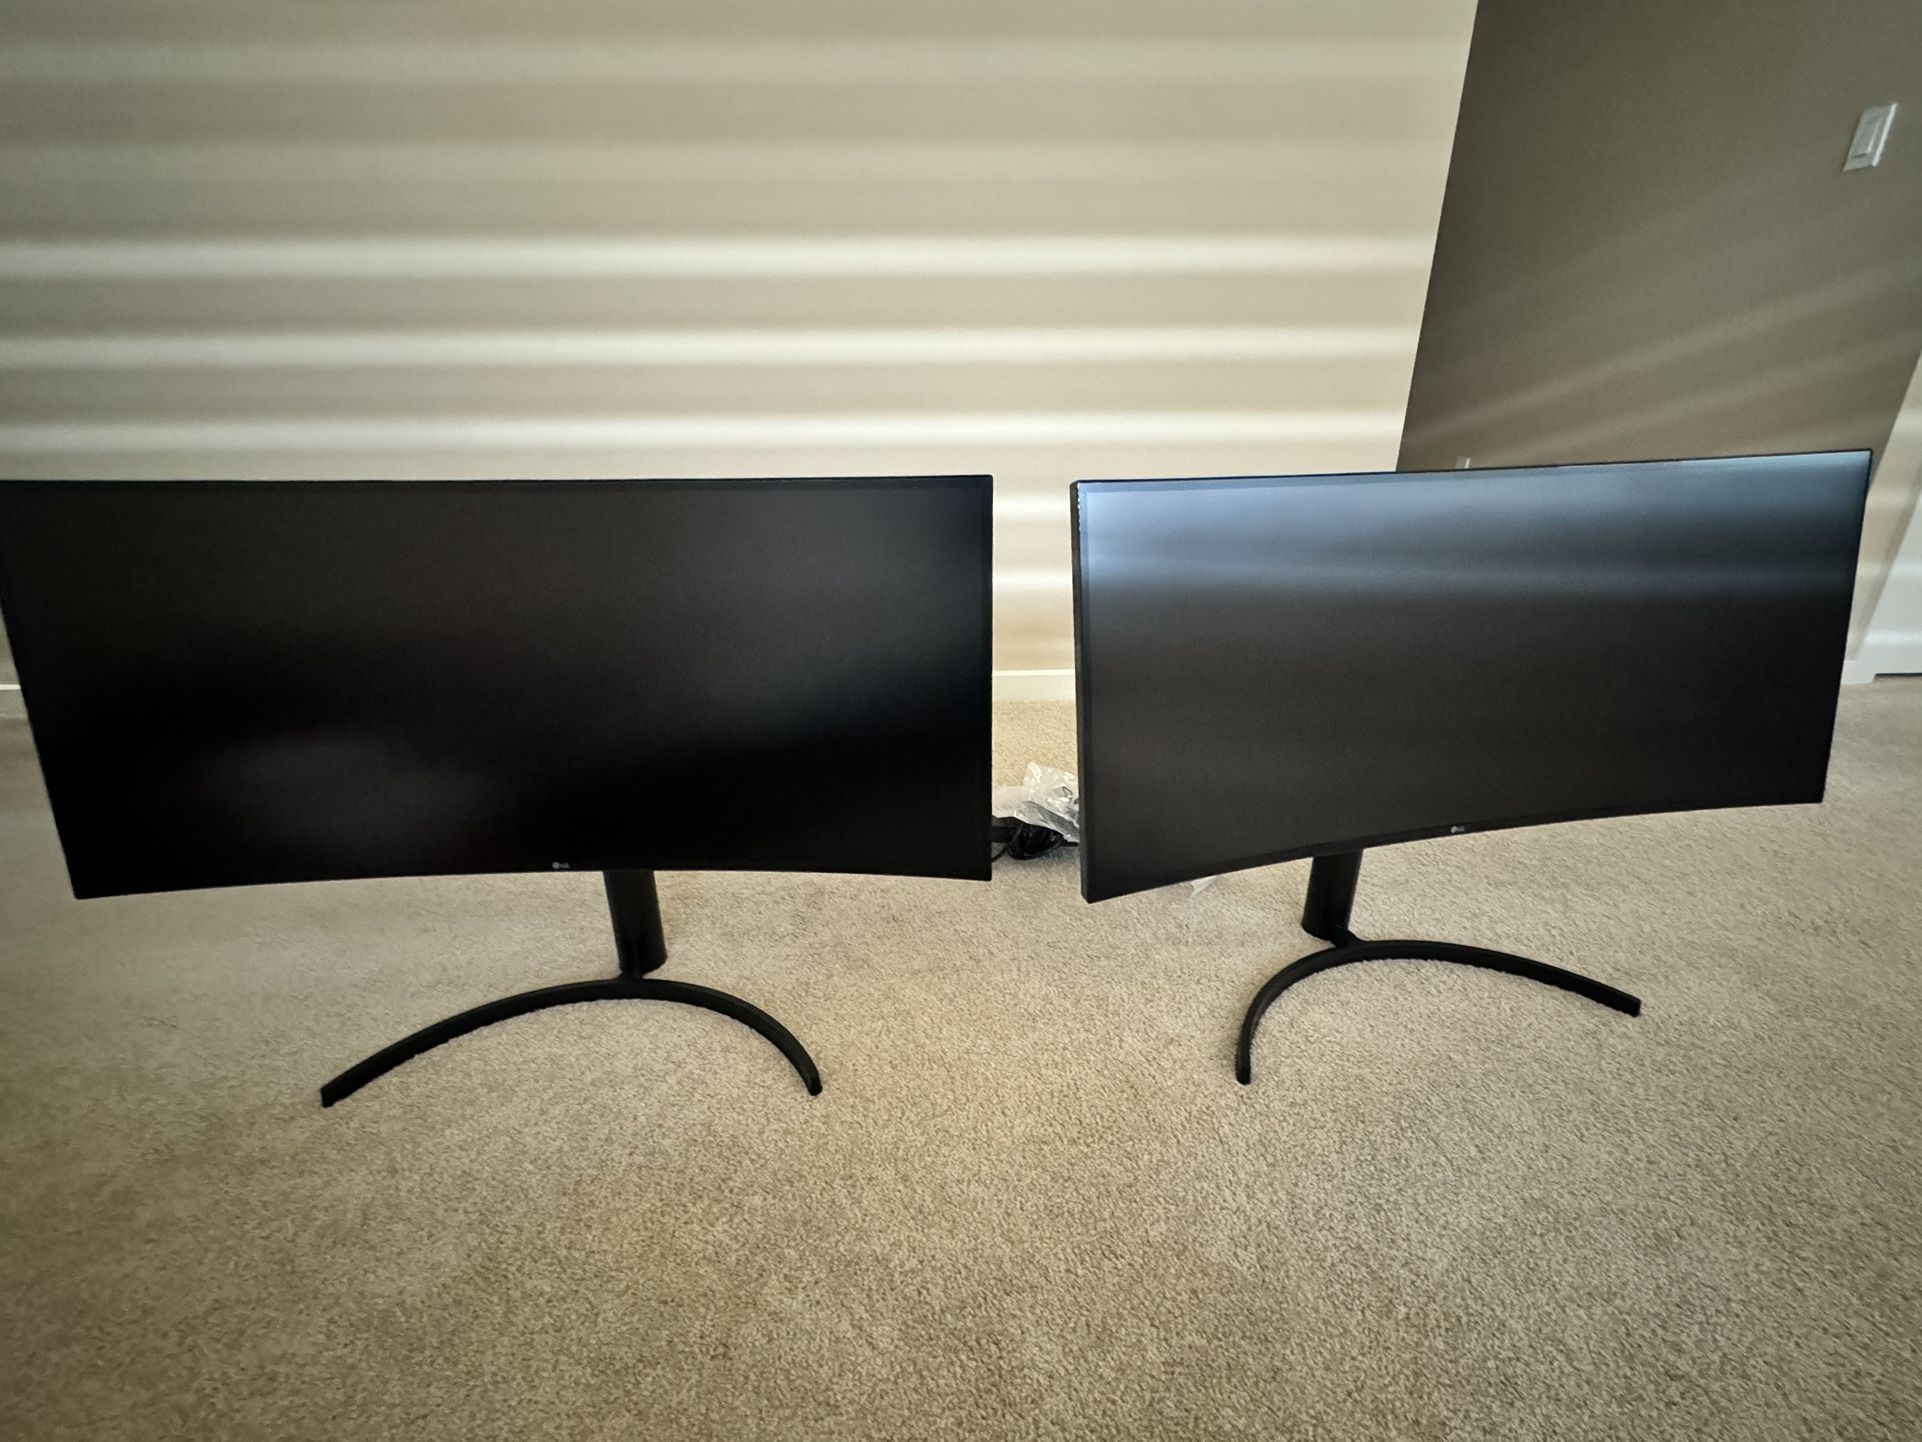 3 Curved Computer Monitors